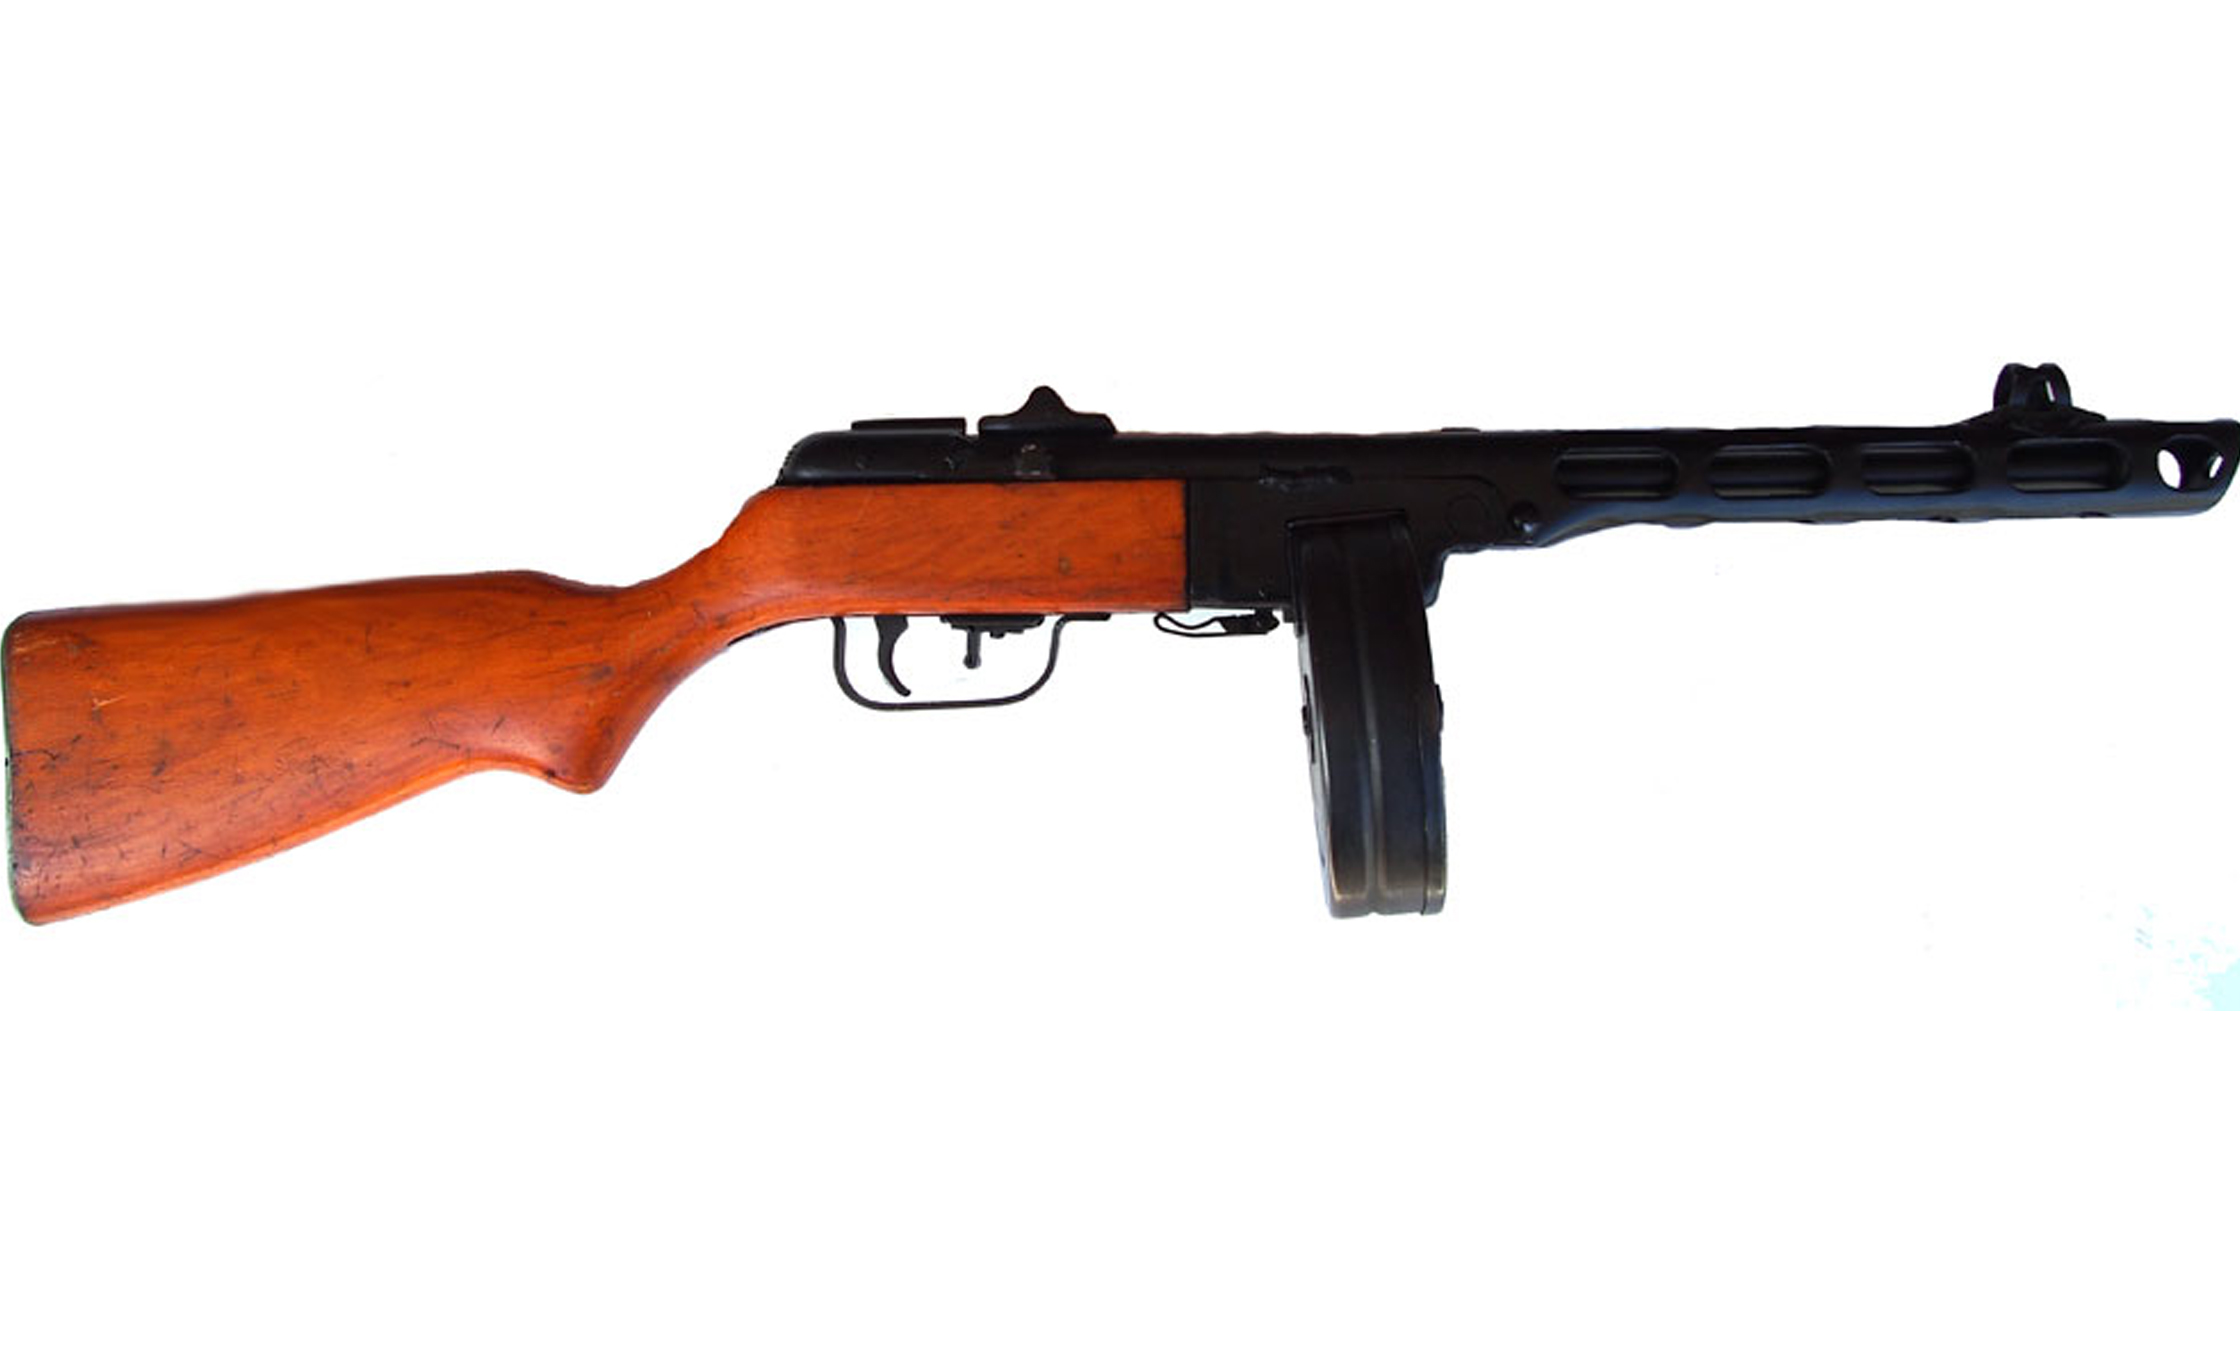 PPSh-41 - the Gun That Saved Mother Russia.